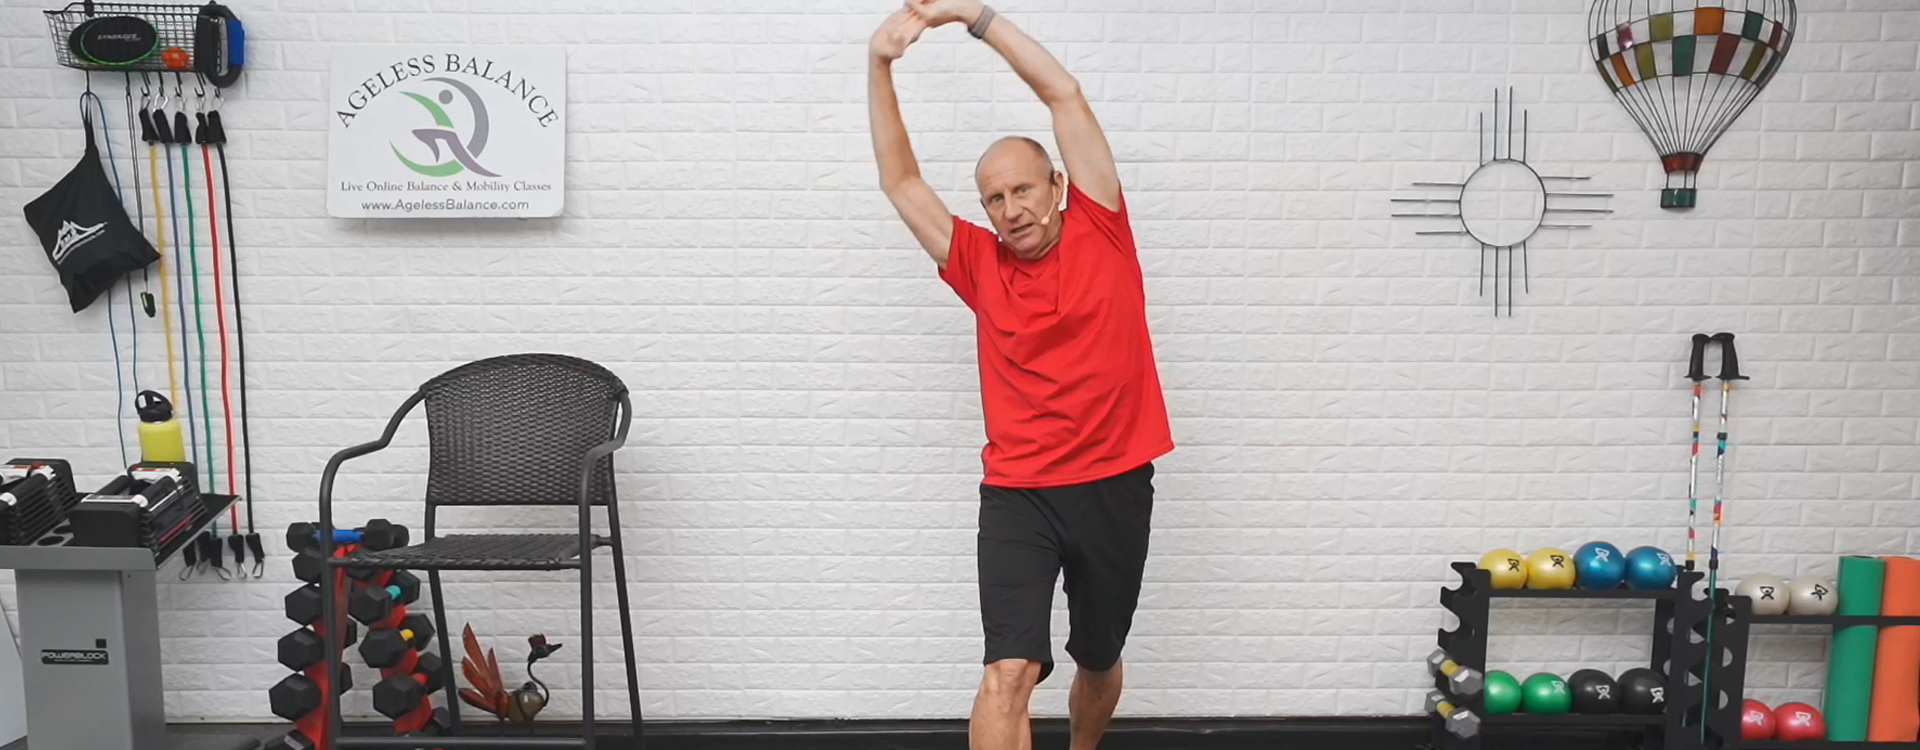 Ageless Balance In-Home Balance and Mobility Training Specialist